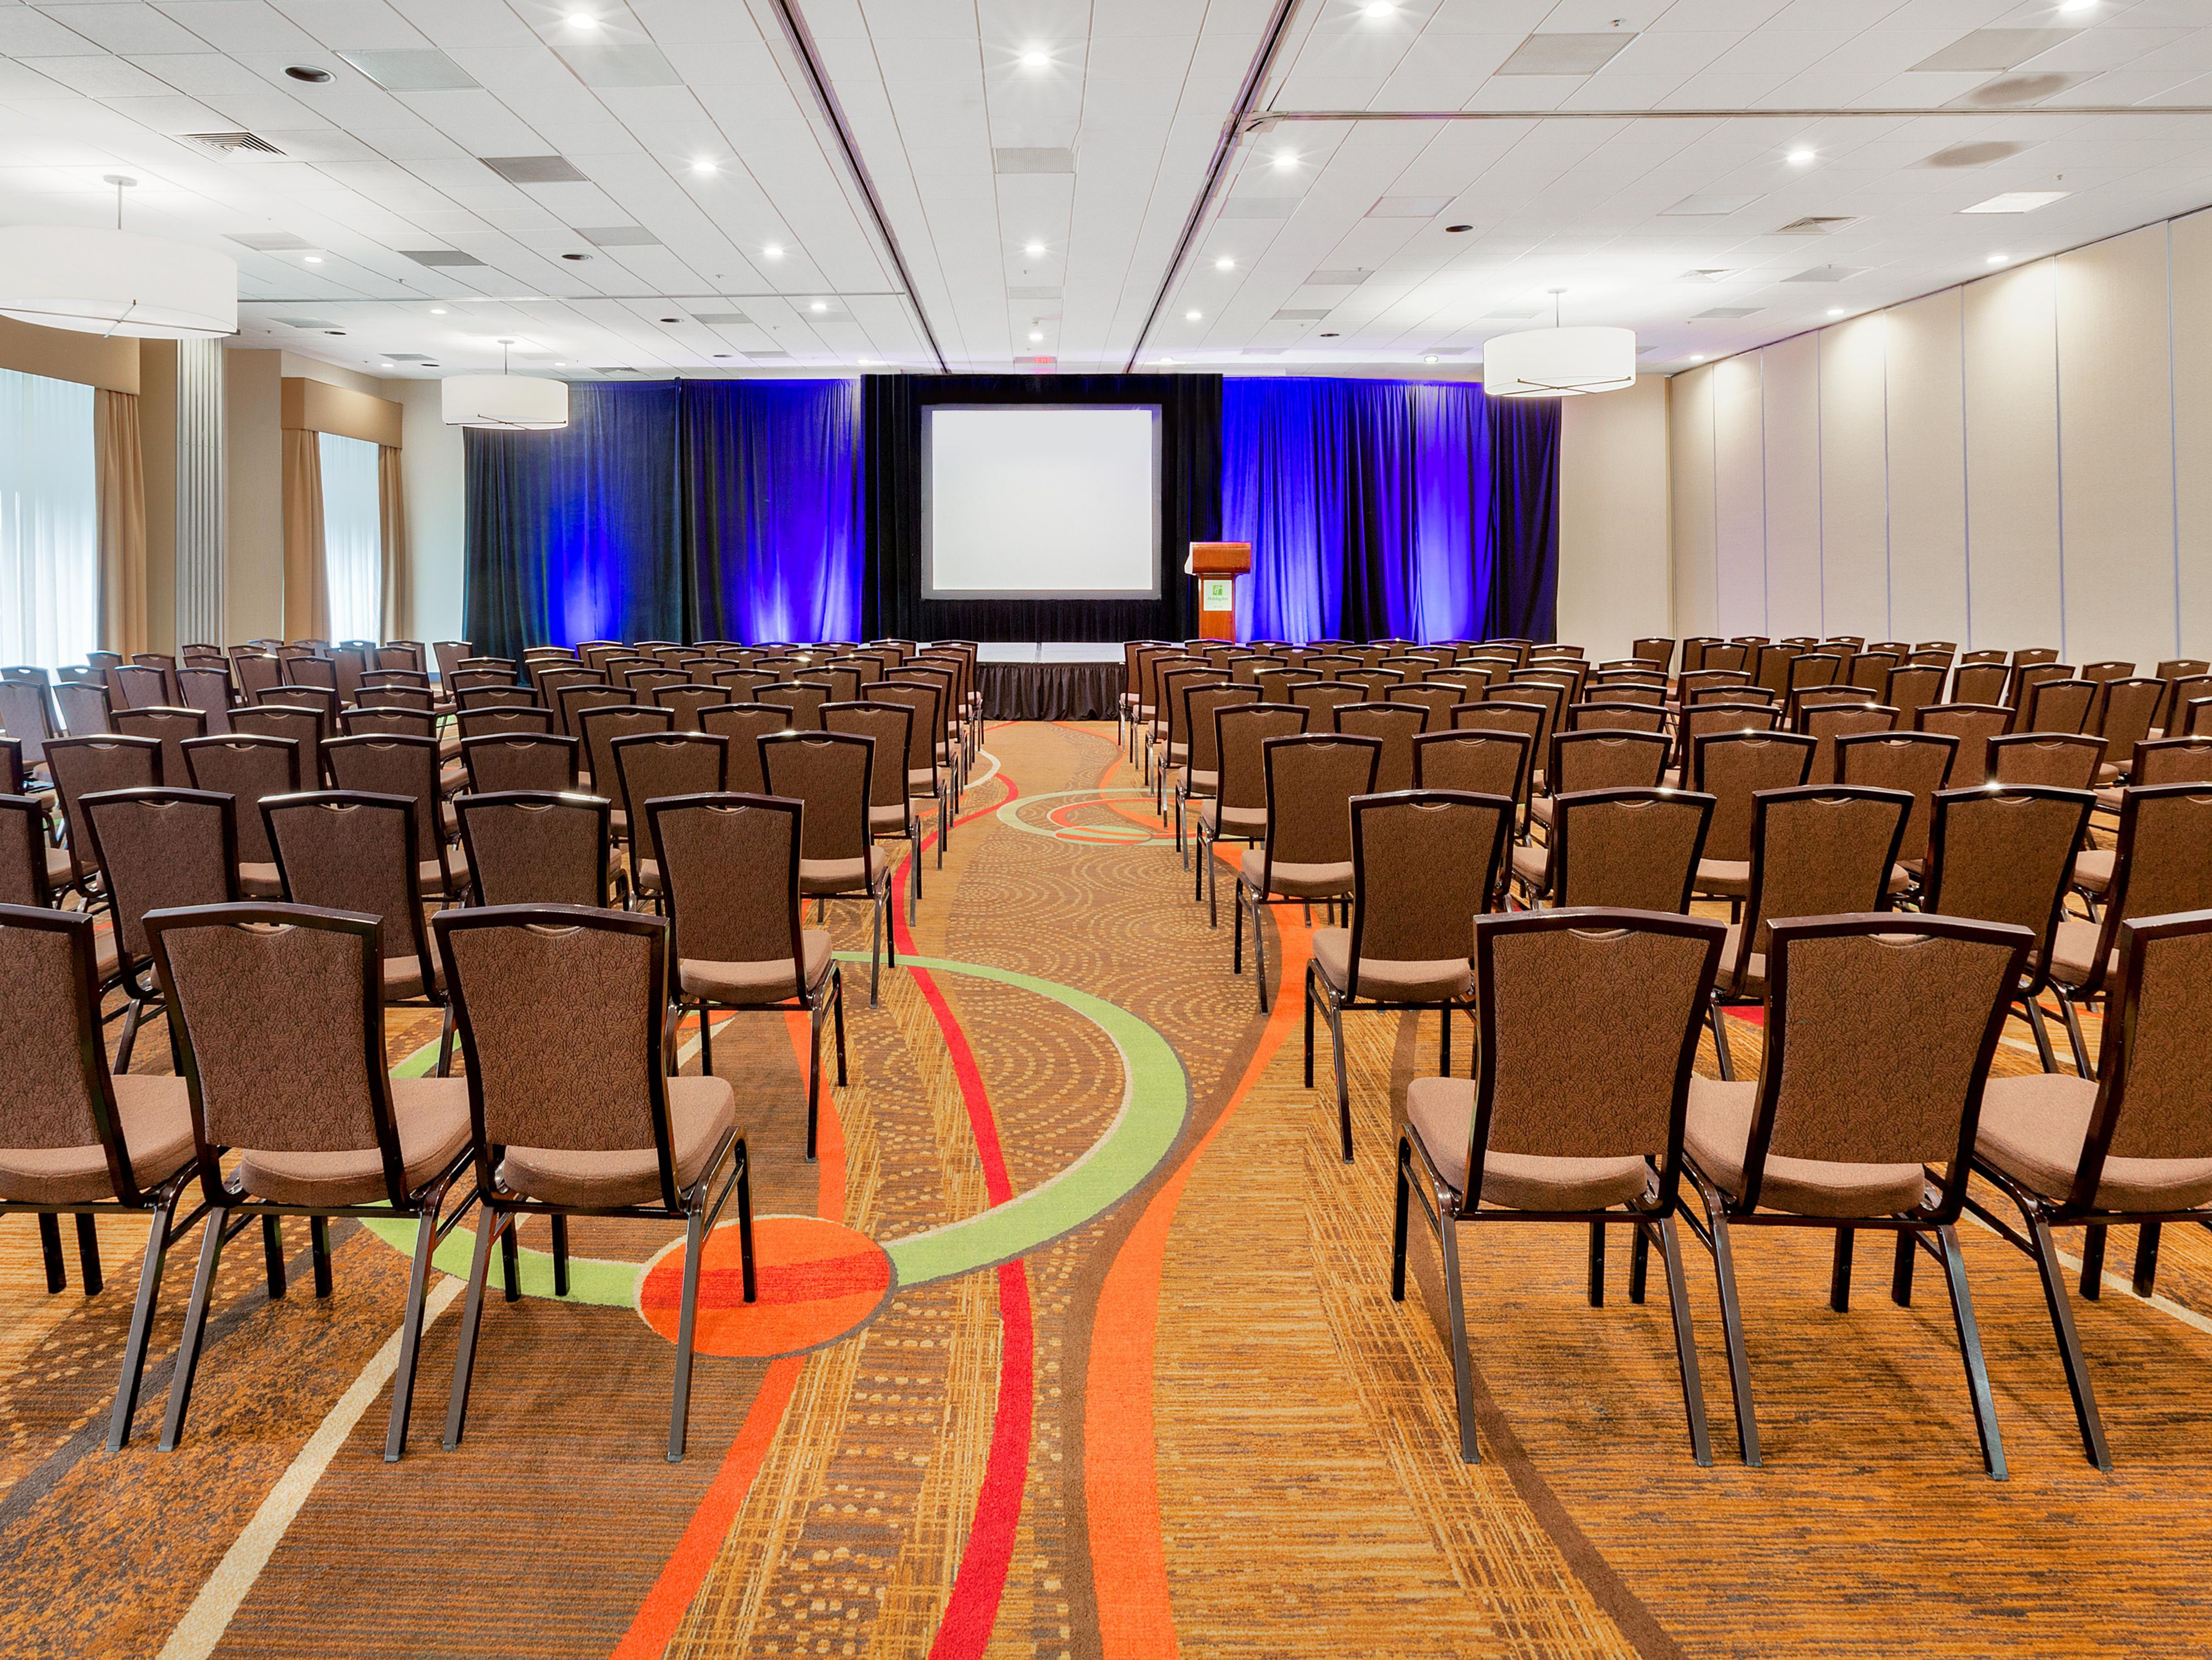 We have over 20,000 sq. ft. of indoor and outdoor event space to accommodate your event. The California Ballroom is 10,000 sq. ft. and can be split into multiple breakout rooms. Enjoy the CA sunshine and hold your reception, dinner or breaks on our Patios. 